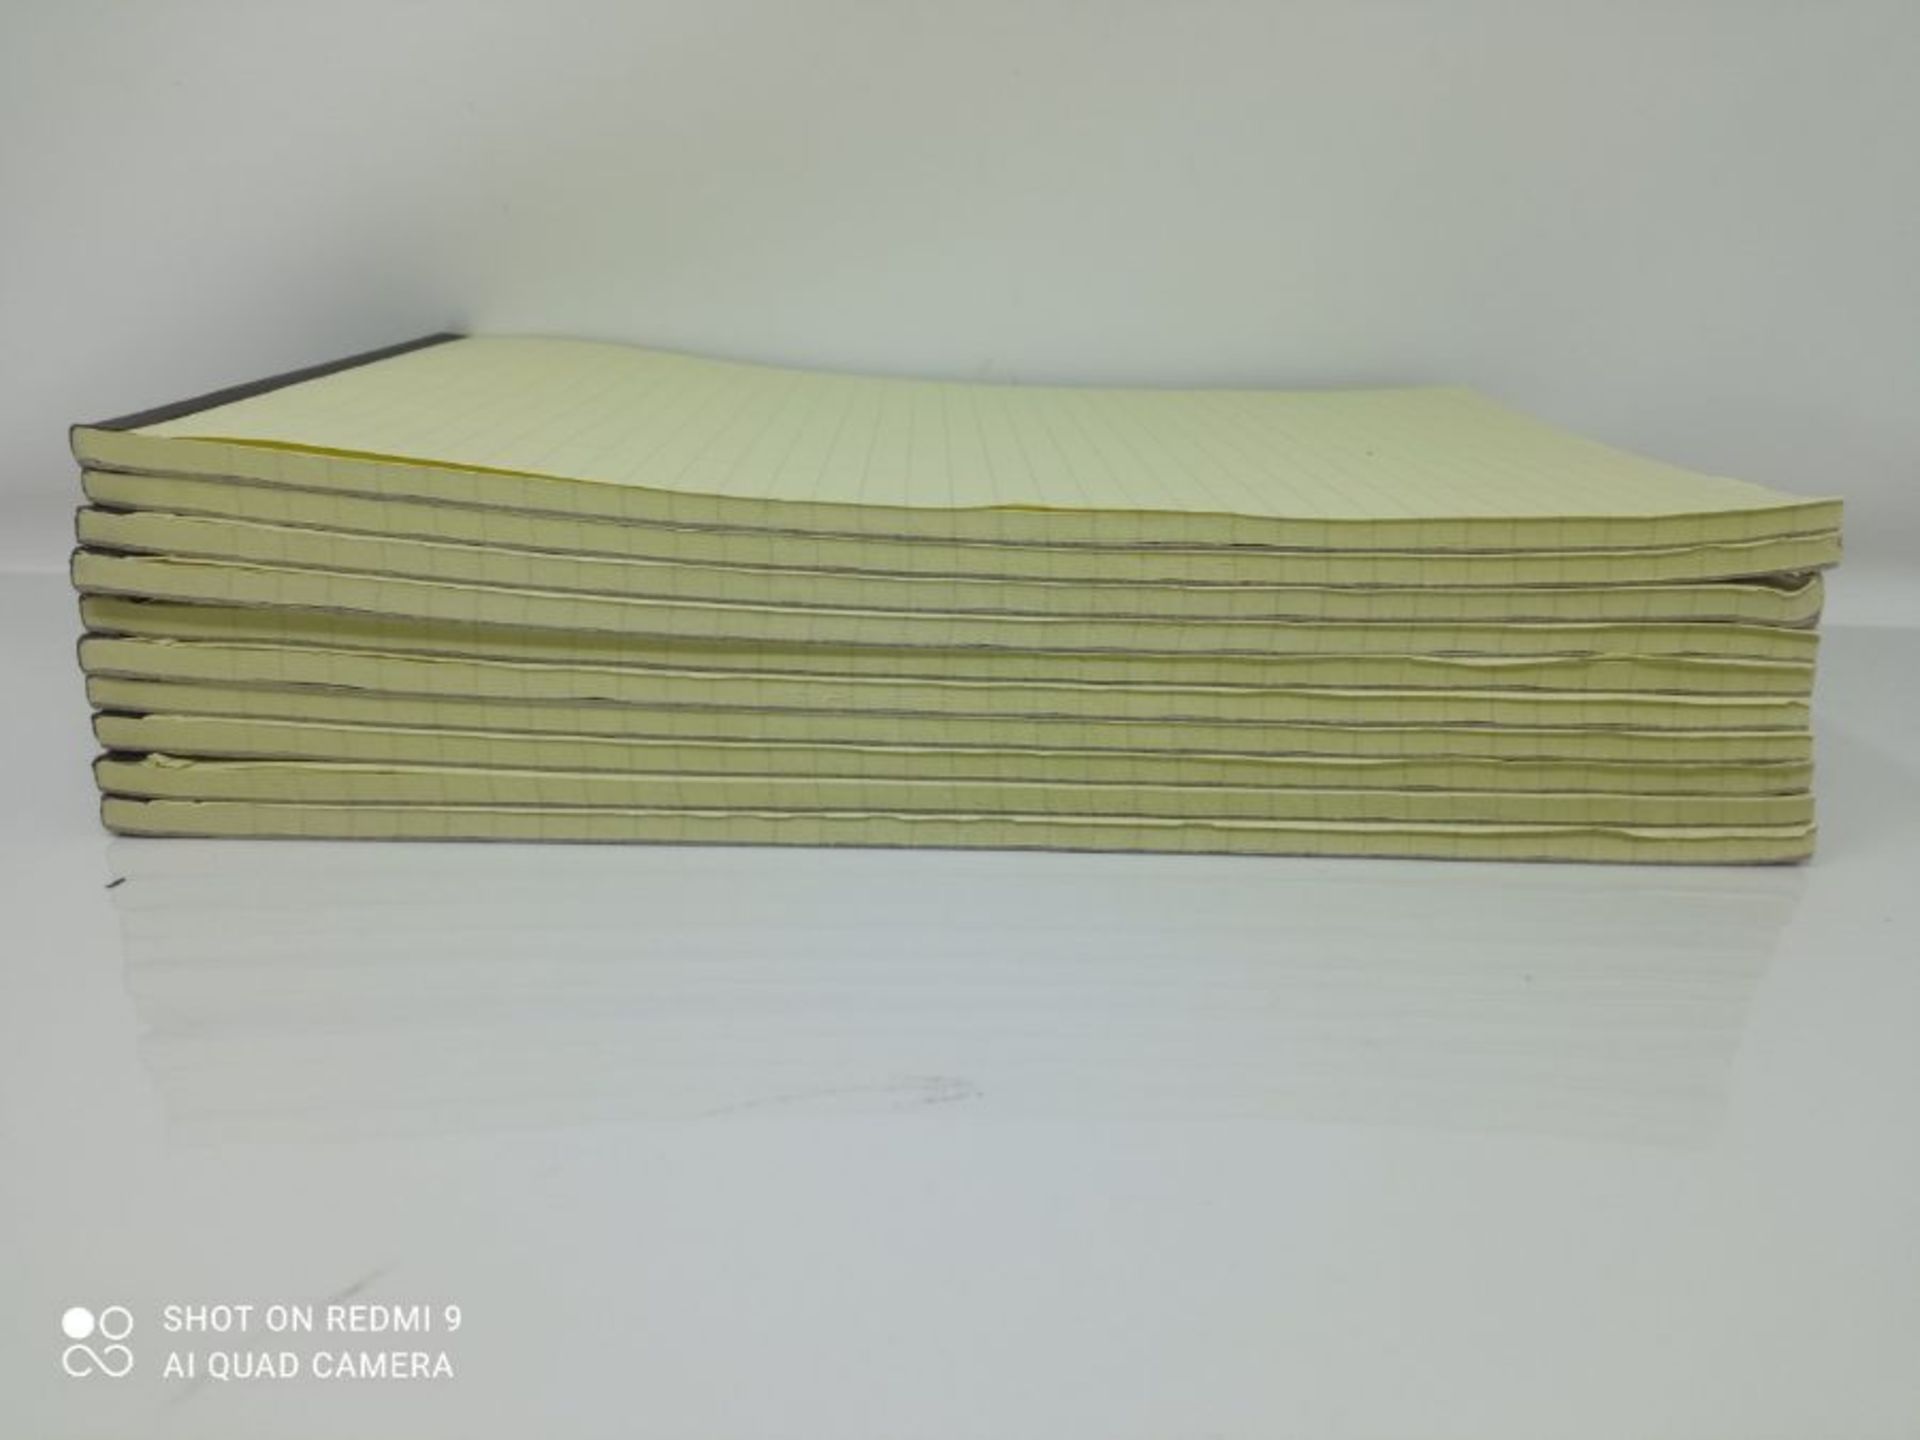 Q-Connect Ruled Stitch Bound Executive Pad 50 Pages, A4, Yellow, Pack of 10 - Image 2 of 2